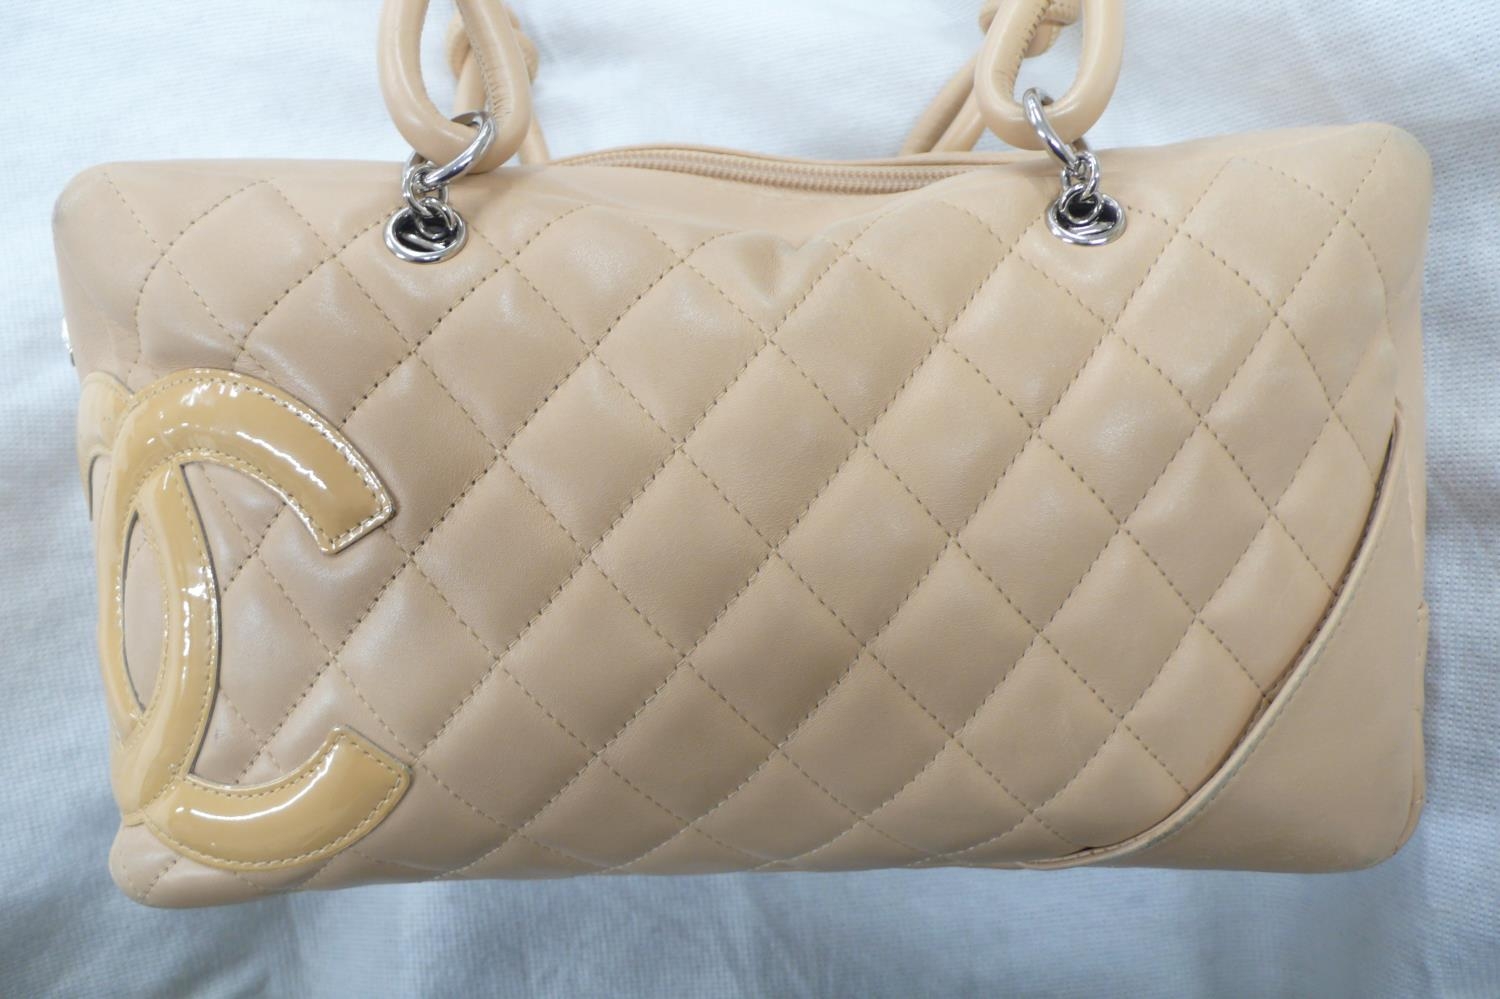 Chanel quilted peach leather handbag with patent leather logo, knot and loop handles, chrome - Bild 2 aus 10